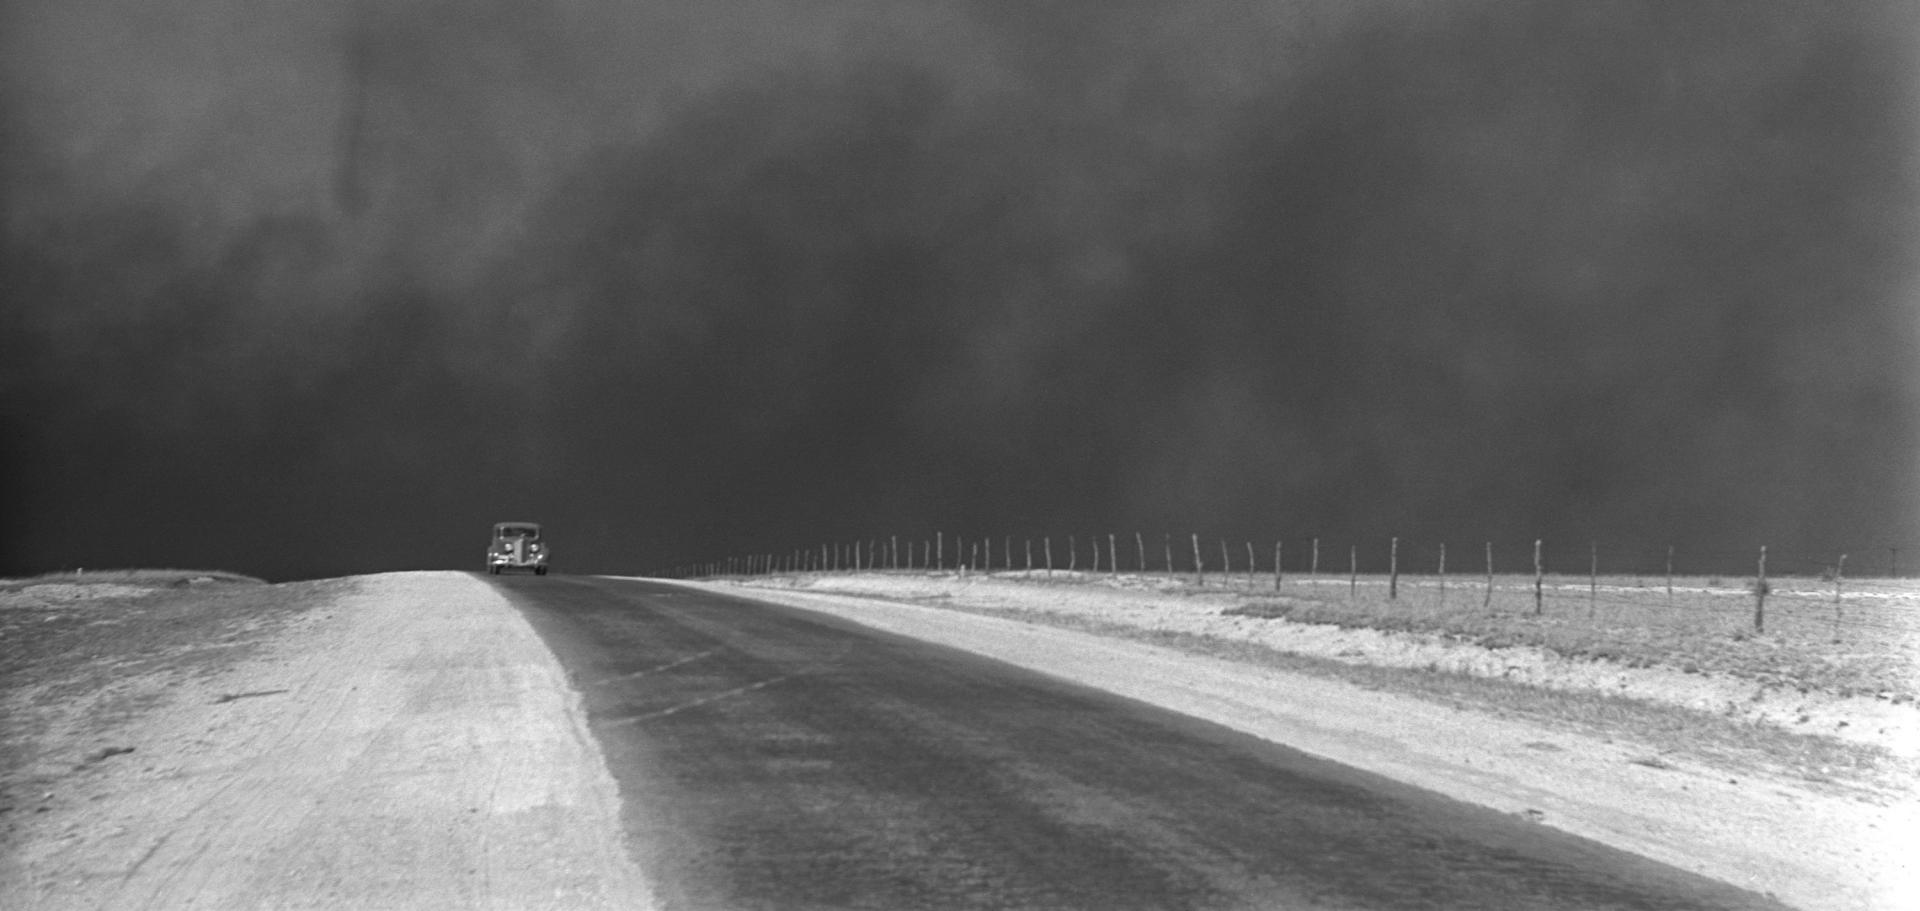 Heavy black clouds of dust rising over the Texas Panhandle, March 1936